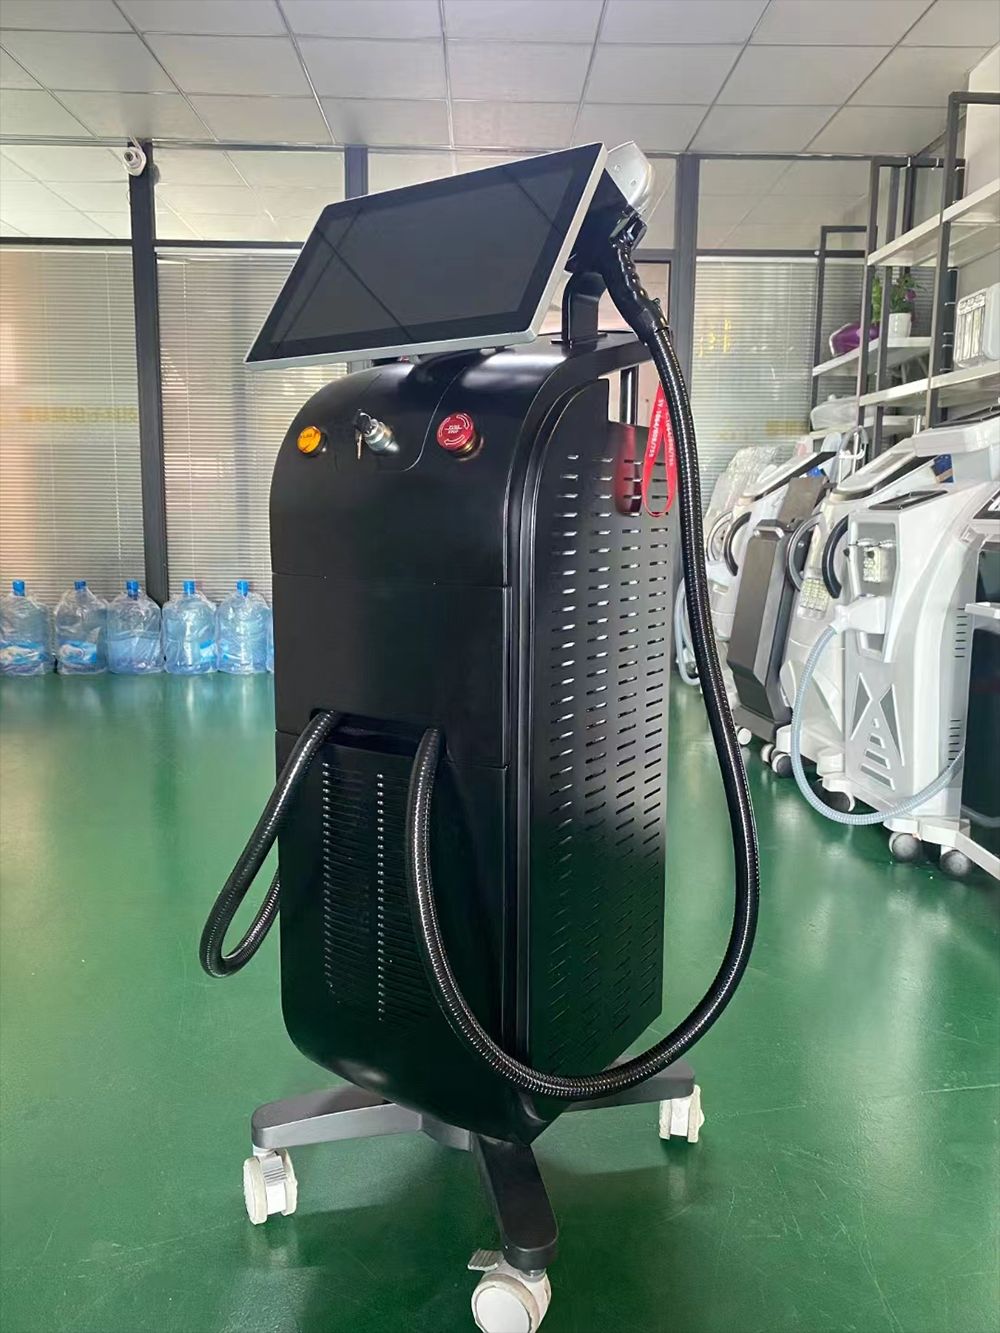 Three Wavelength 808 755 1064 nm Diode Laser Hair Removal Machine Permanent Painless Quick Safe Hair Remove 2 Handles Large Touch Screen Beauty Salon Use For Sale Three Wavelength 808 755 1064 nm Diode Laser Hair Removal Machine laser hair removal machine cost,hair removal device,hair removal machine